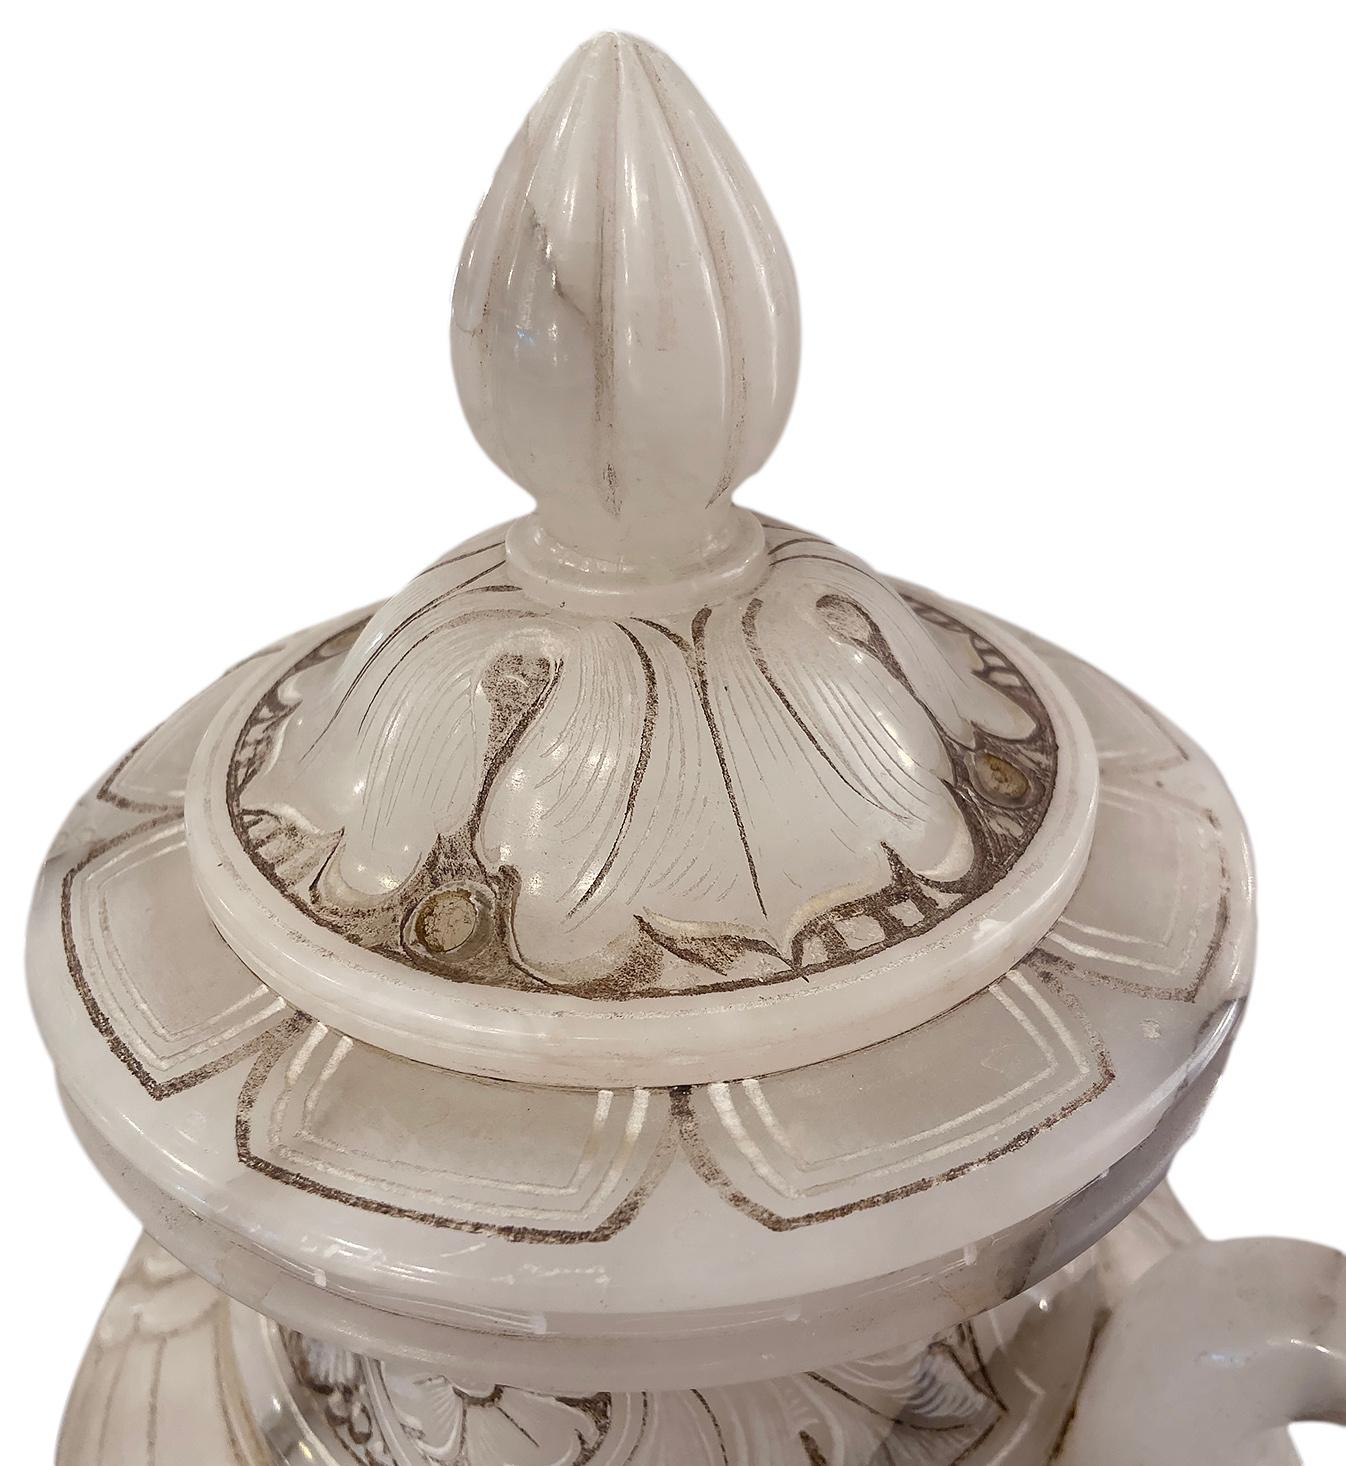 A circa 1920's French carved alabaster urn-shaped lamp with interior light.

Measurements:
Height: 21.25